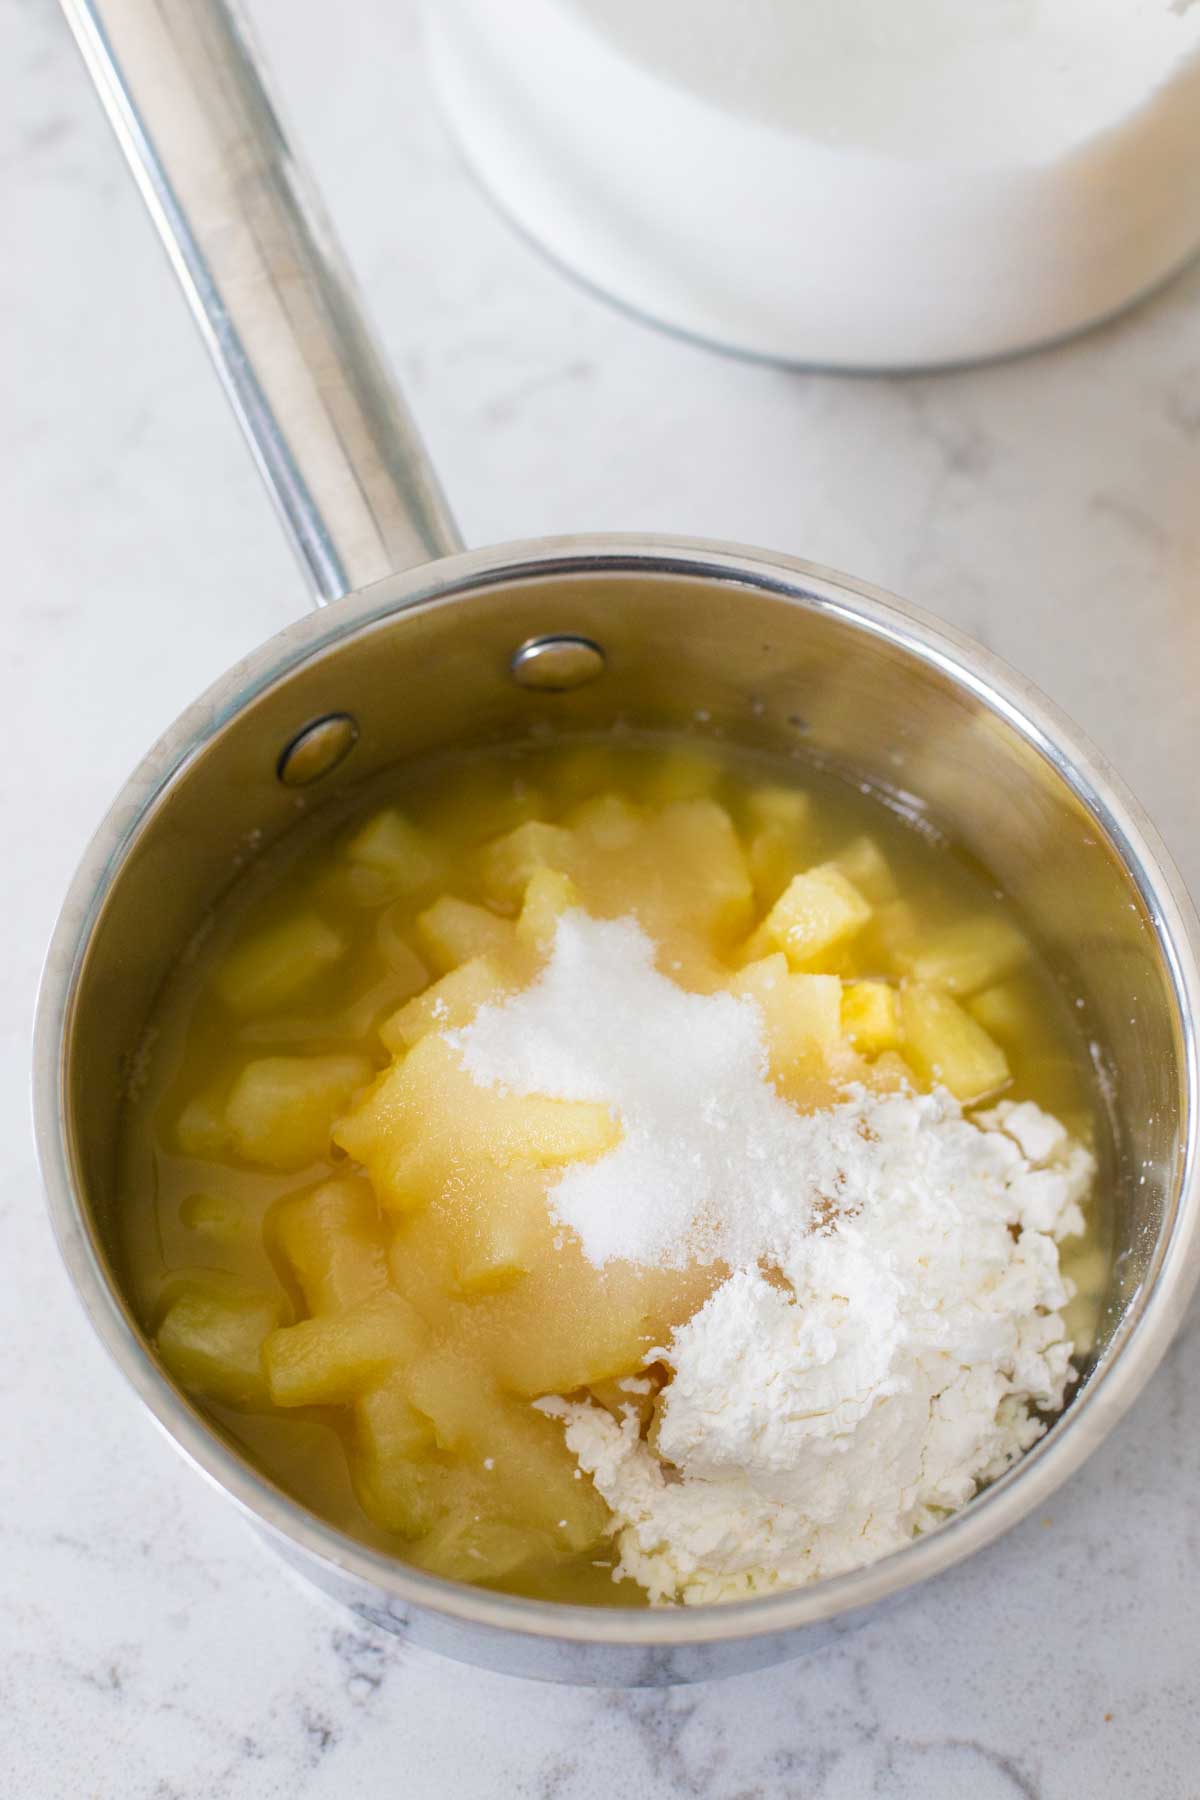 The pineapple filling ingredients are all added to a small saucepan.